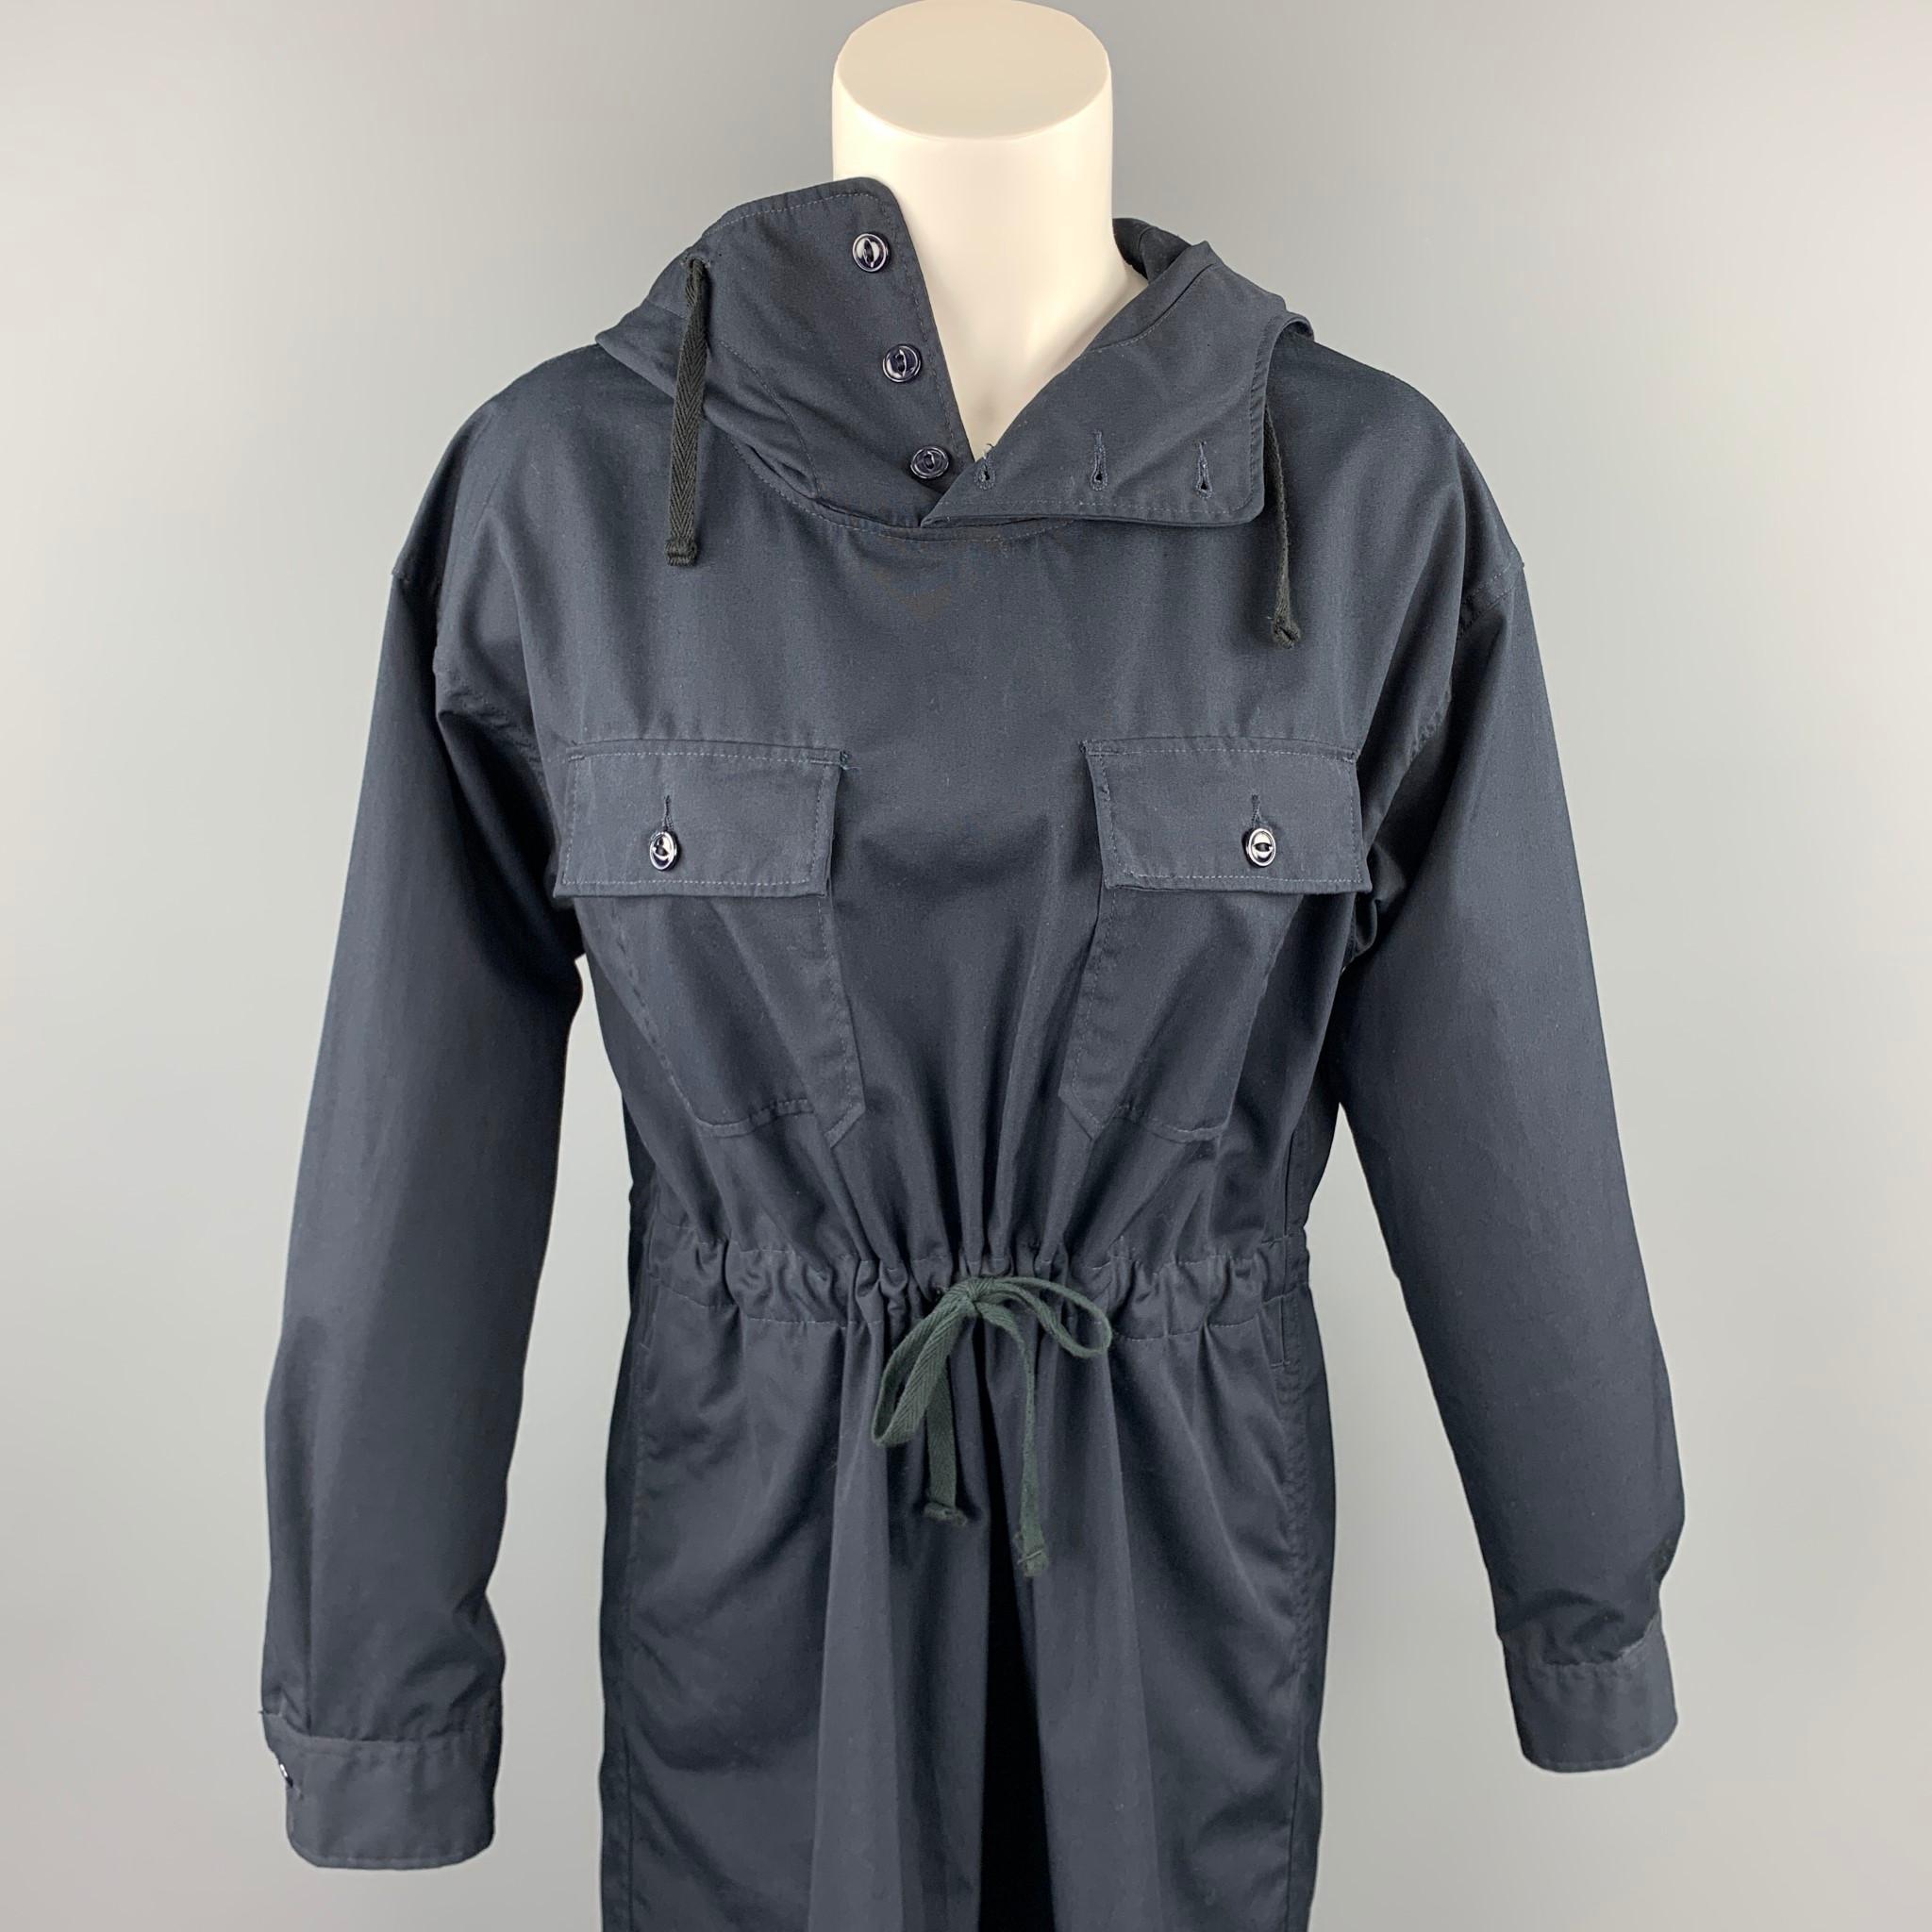 ENGINEERED GARMENTS shirt dress comes in a black polyester / cotton featuring a hooded style, high collar, front pockets, and a drawstring closure. Made in USA.

Very Good Pre-Owned Condition.
Marked: 1

Measurements:

Shoulder: 20 in. 
Bust: 40 in.